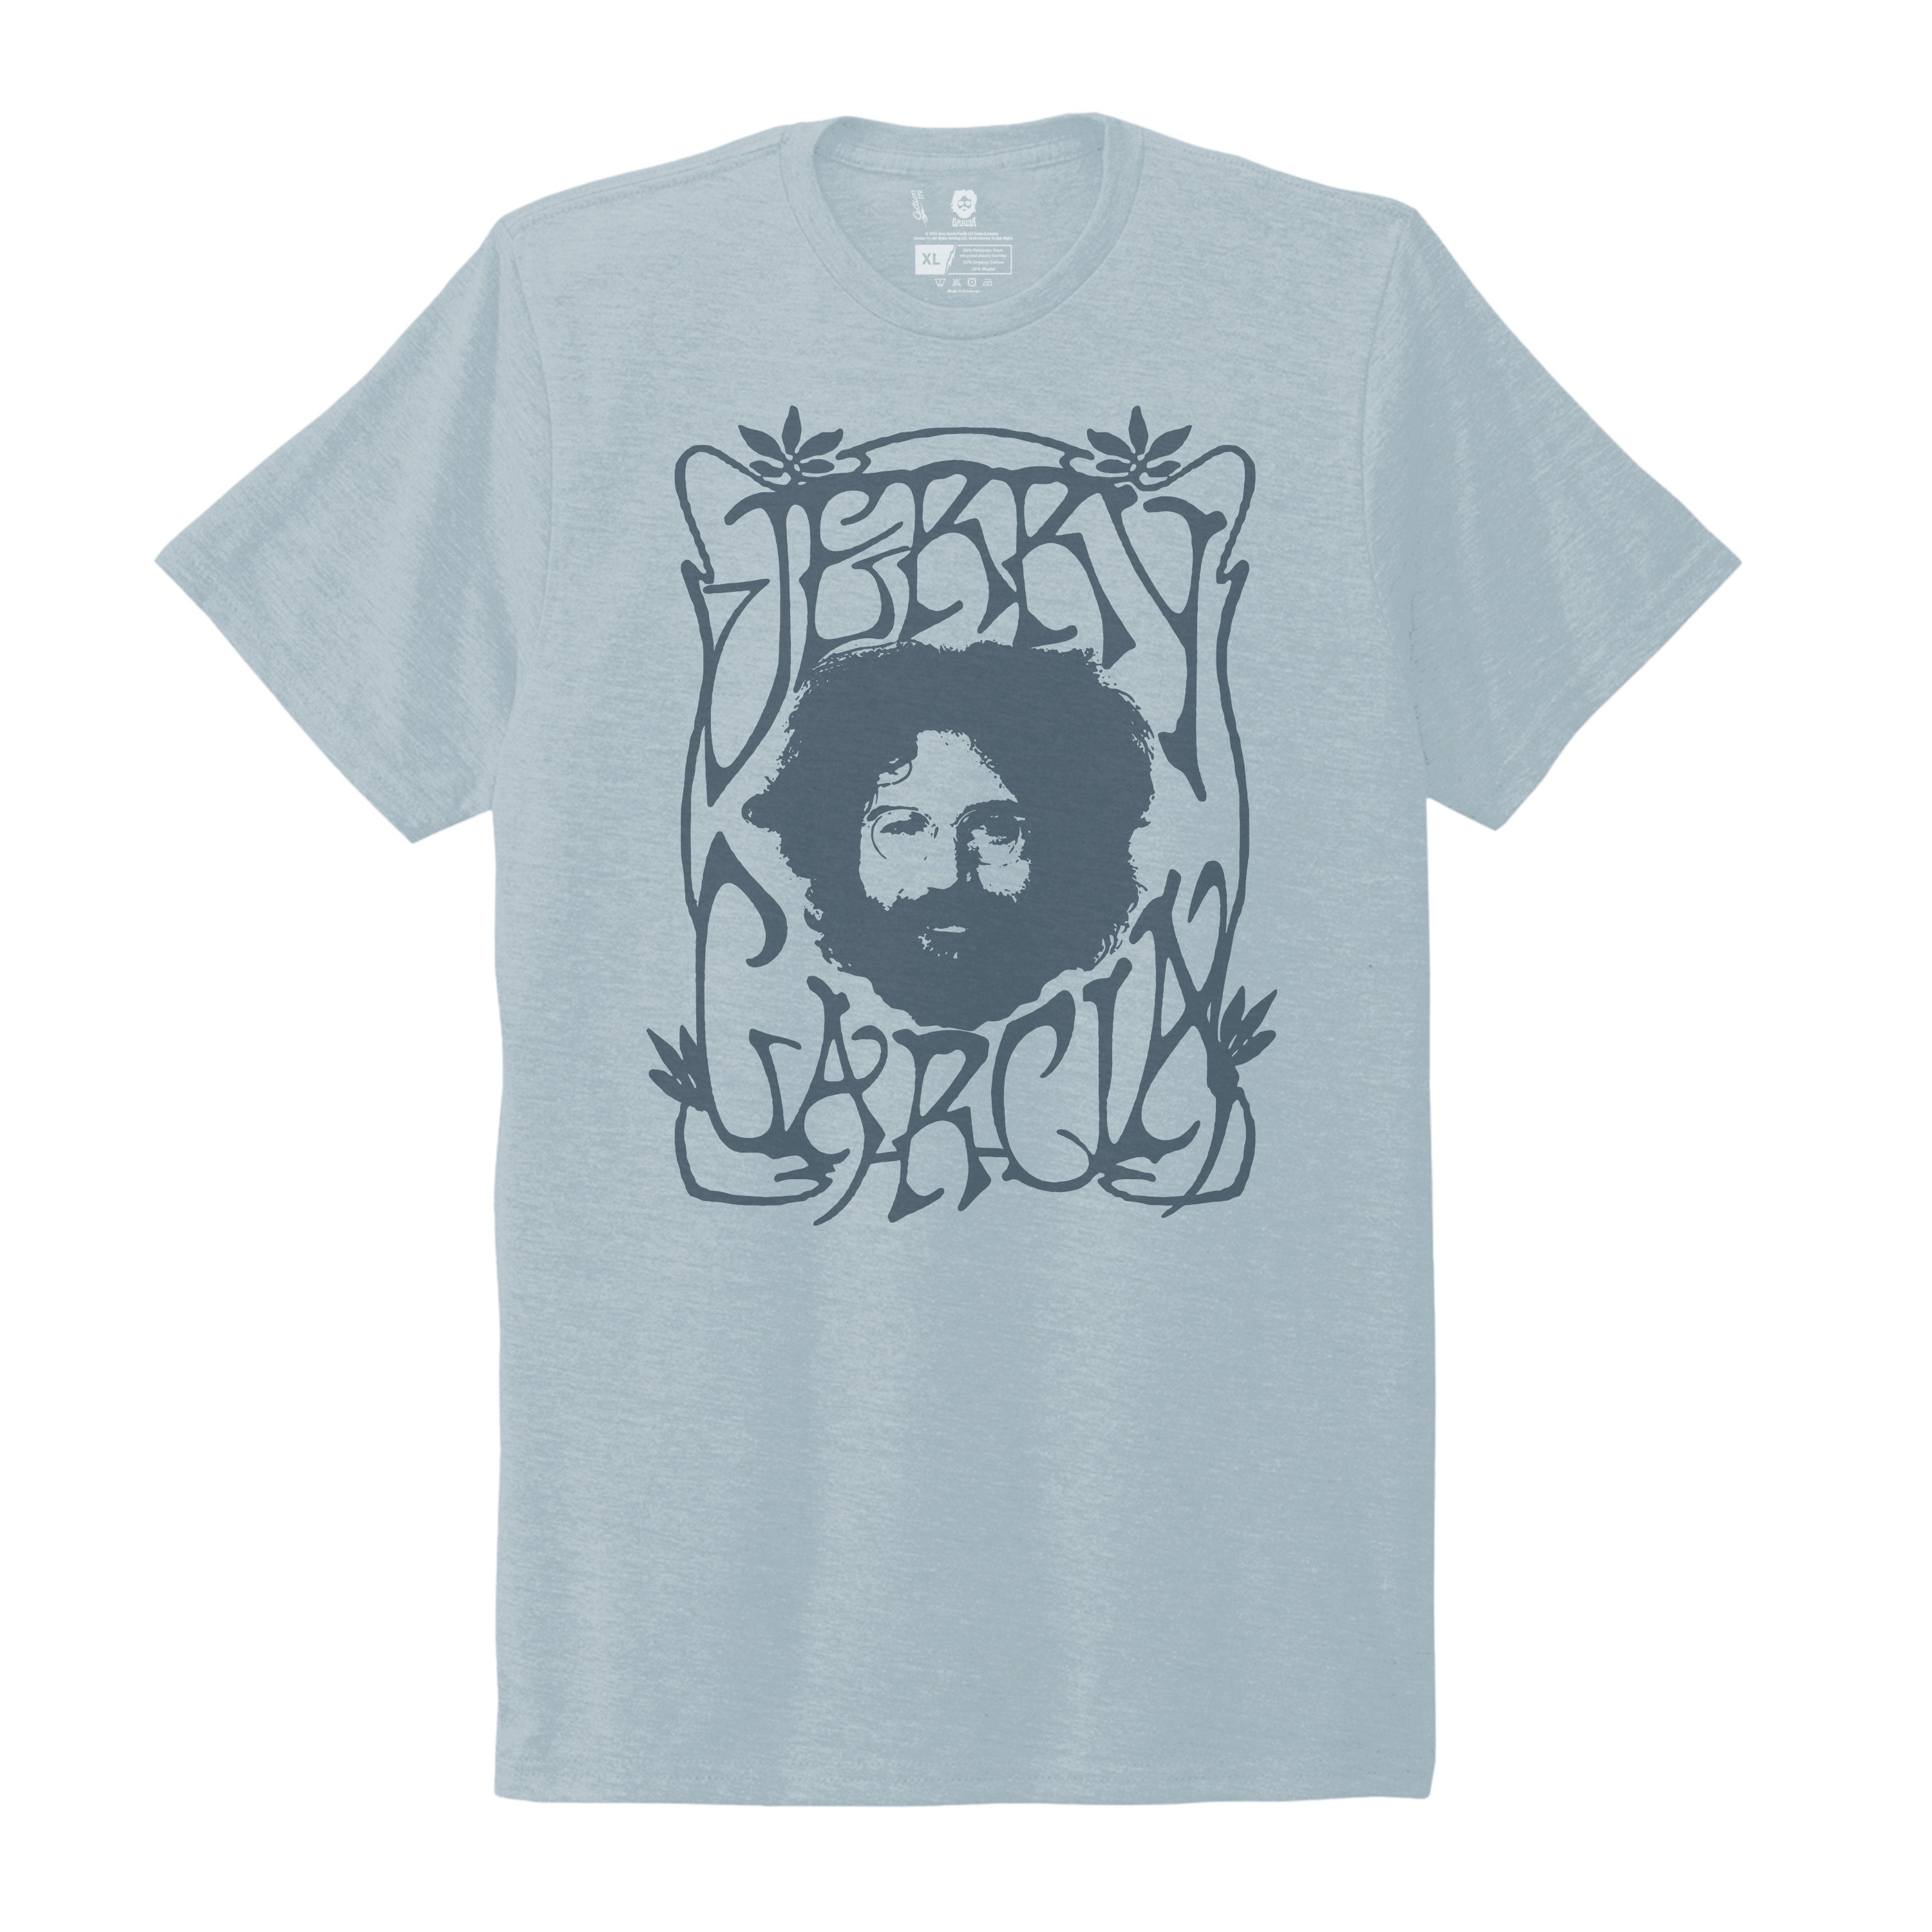 Jerry Garcia Eco T-Shirt Name Graphic– Blue 119 Section & Jerry